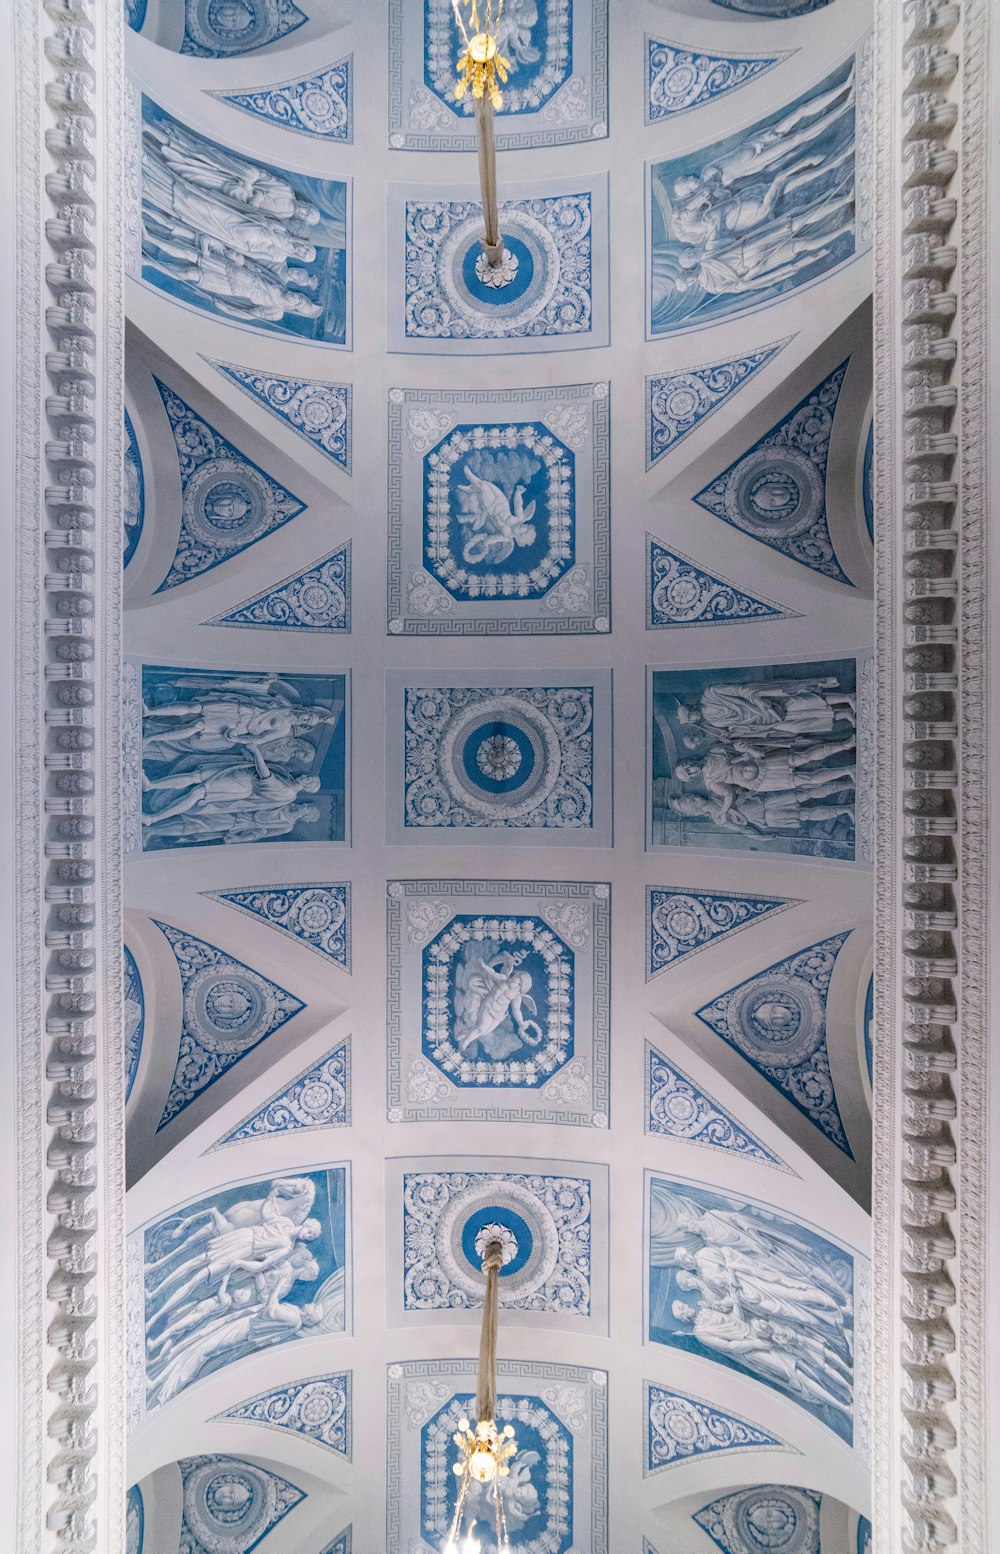 the ceiling of a church with a blue and white design